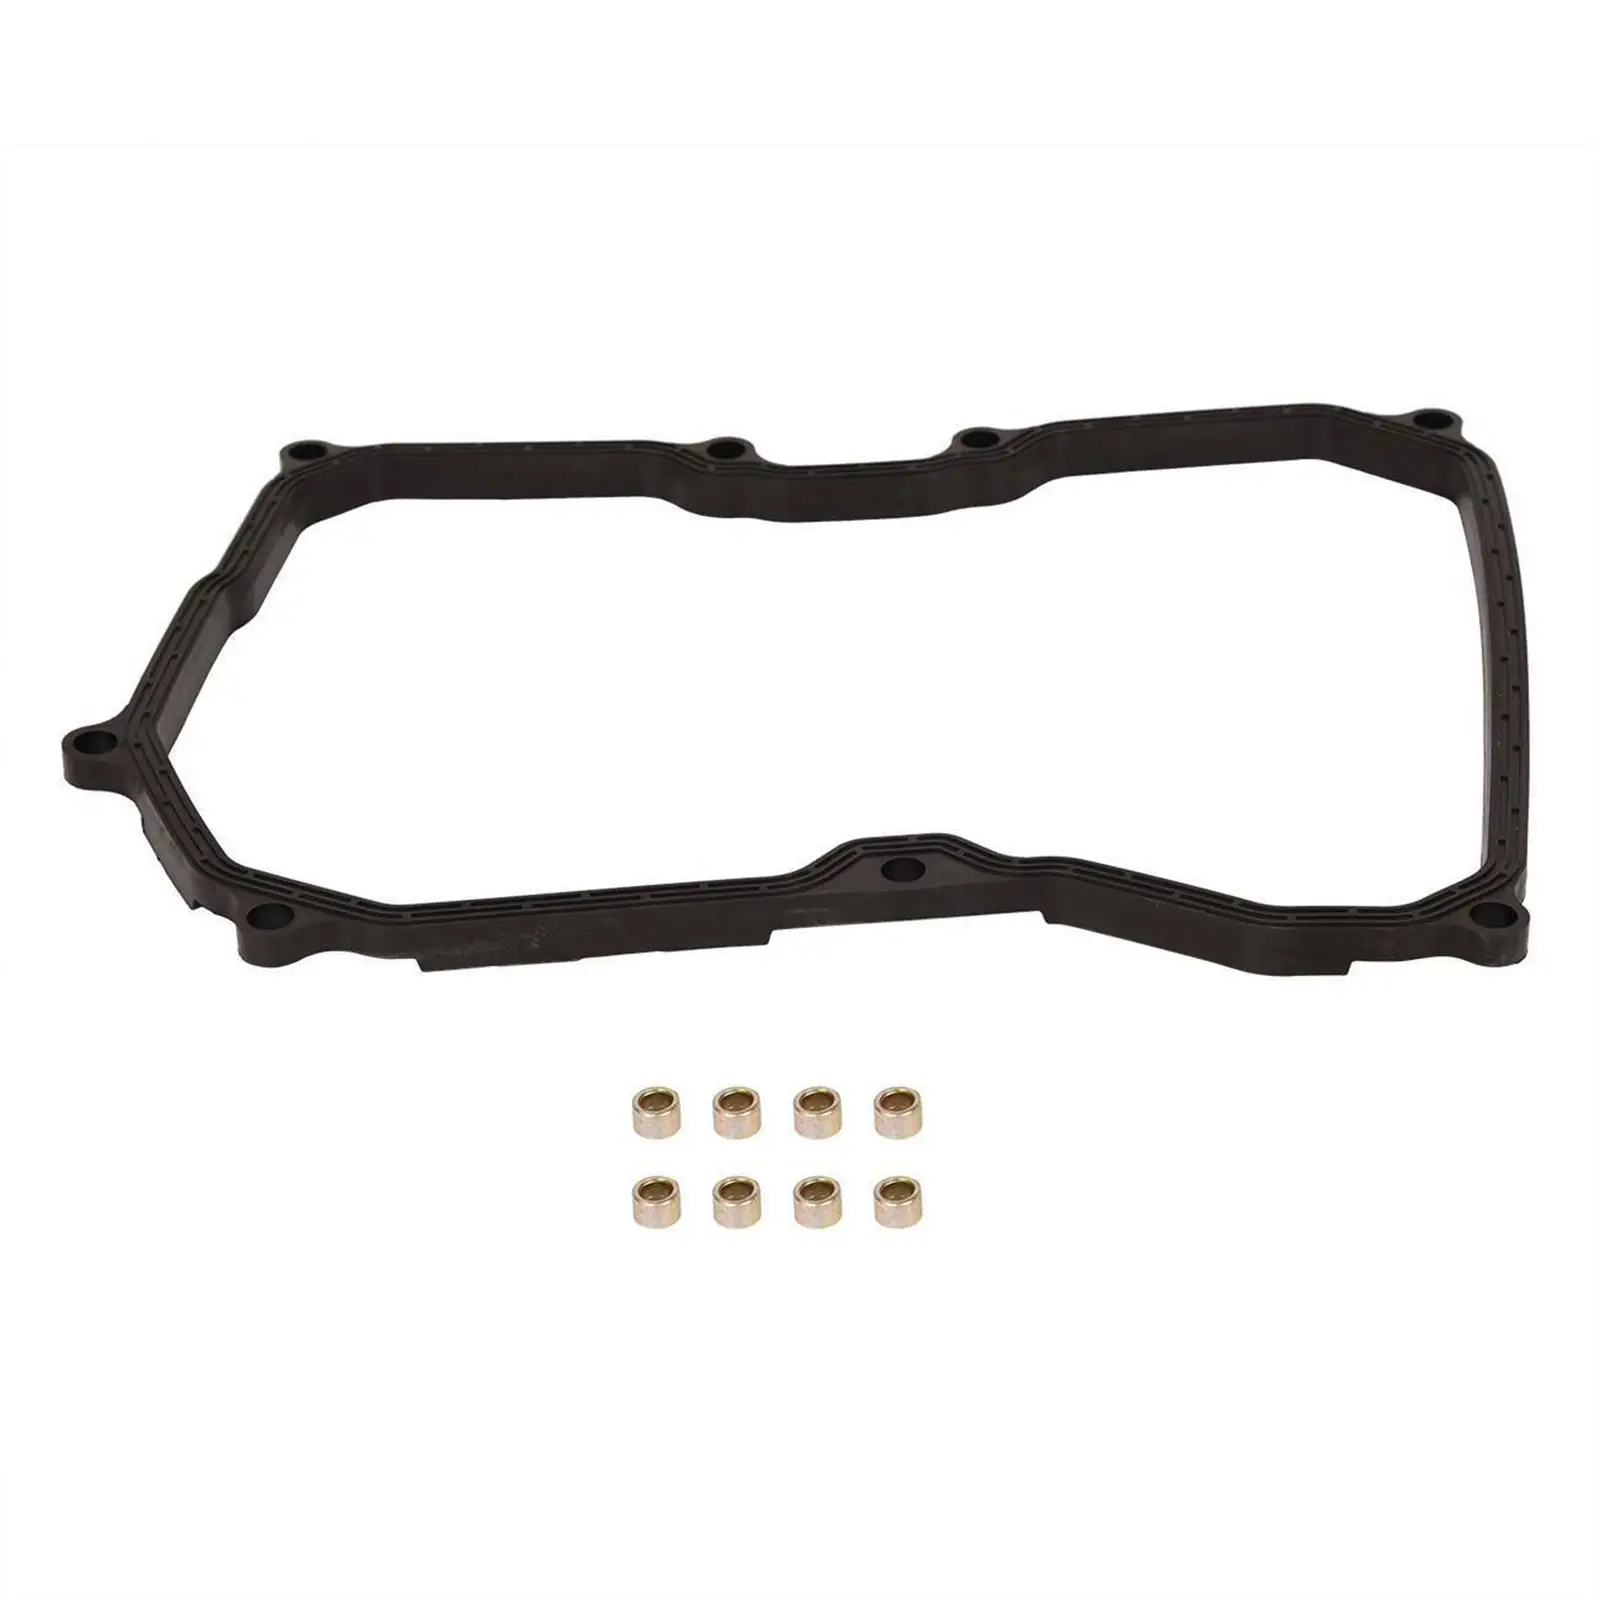 Transmission Oil Pan Gasket Durable Lightweight 24117566356 Fit for Mini Replacement